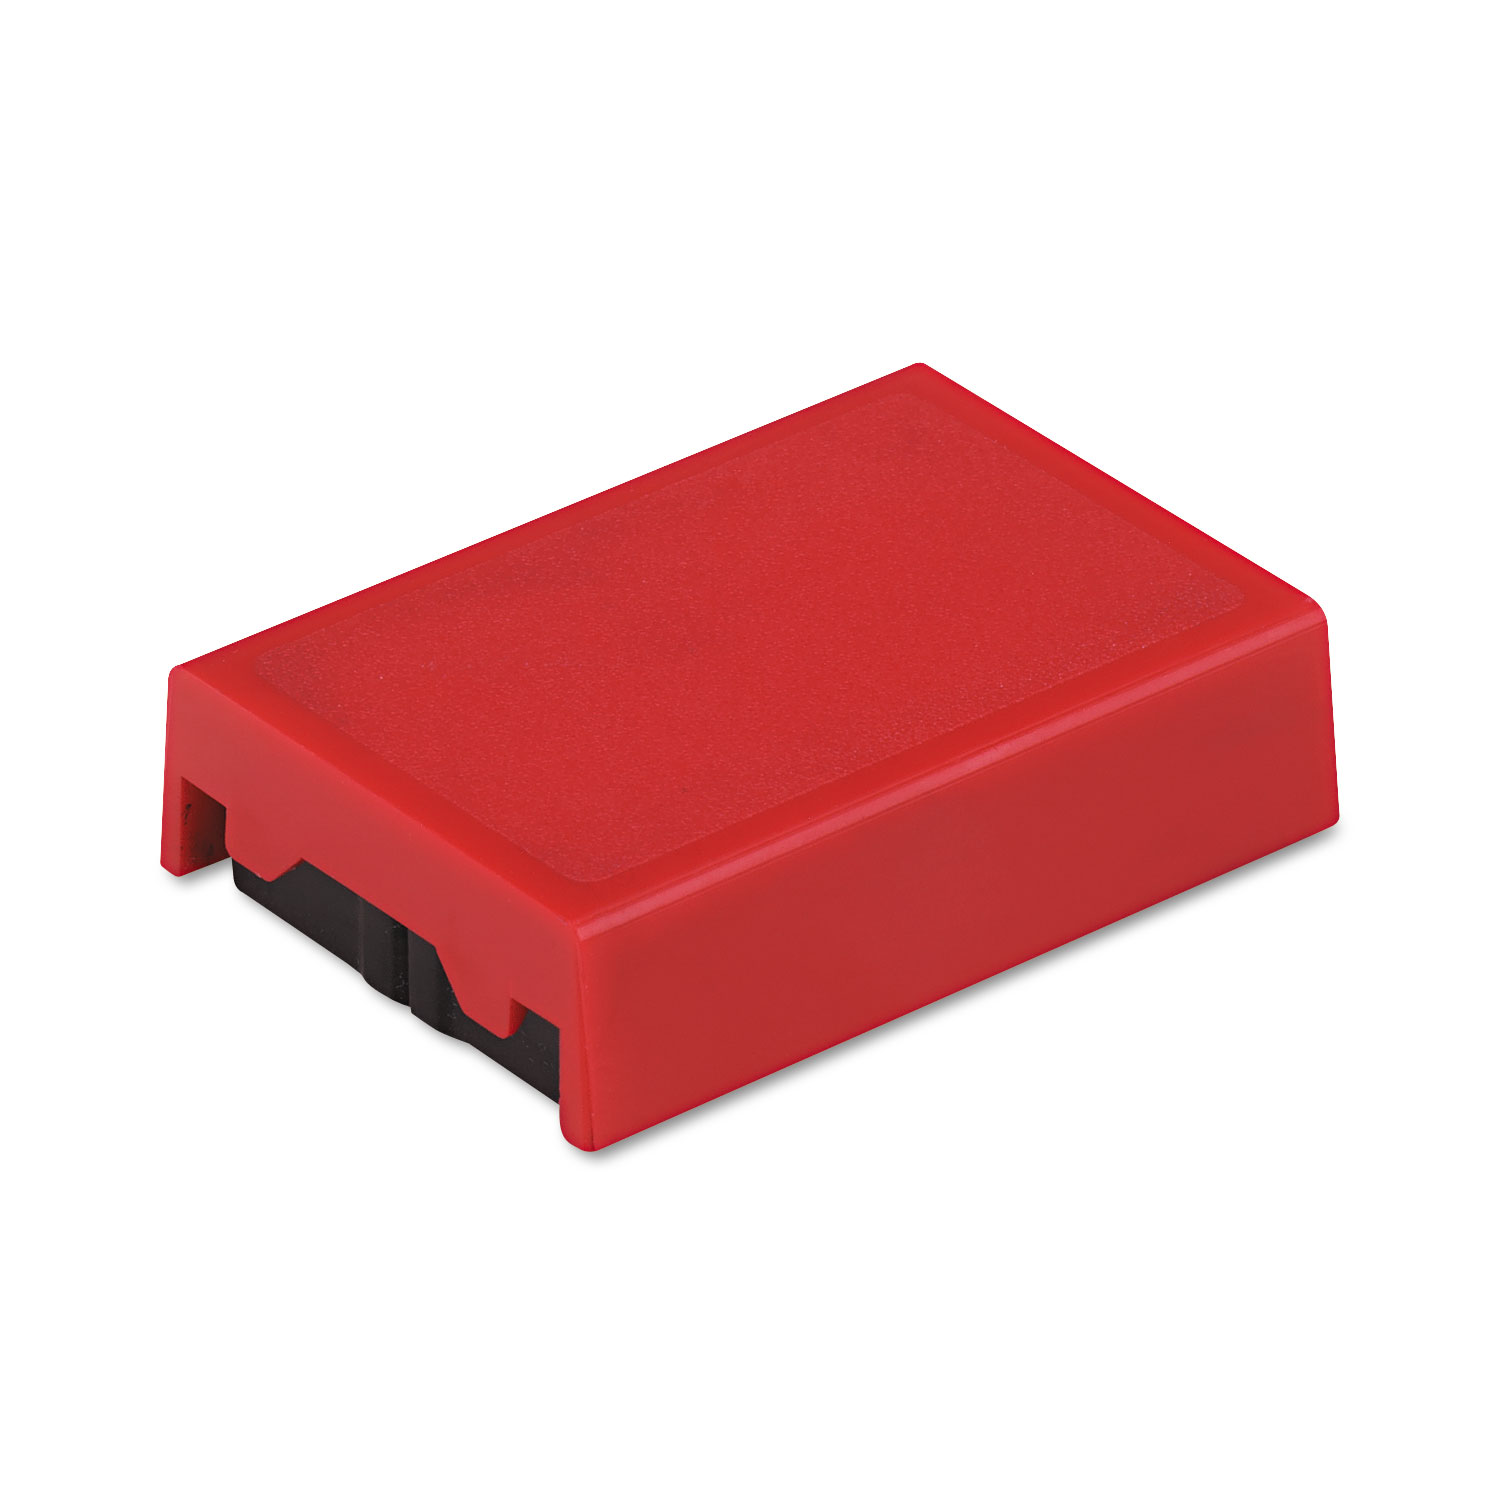 Trodat T4850 Dater Replacement Pad, 3/16 x 1, Red